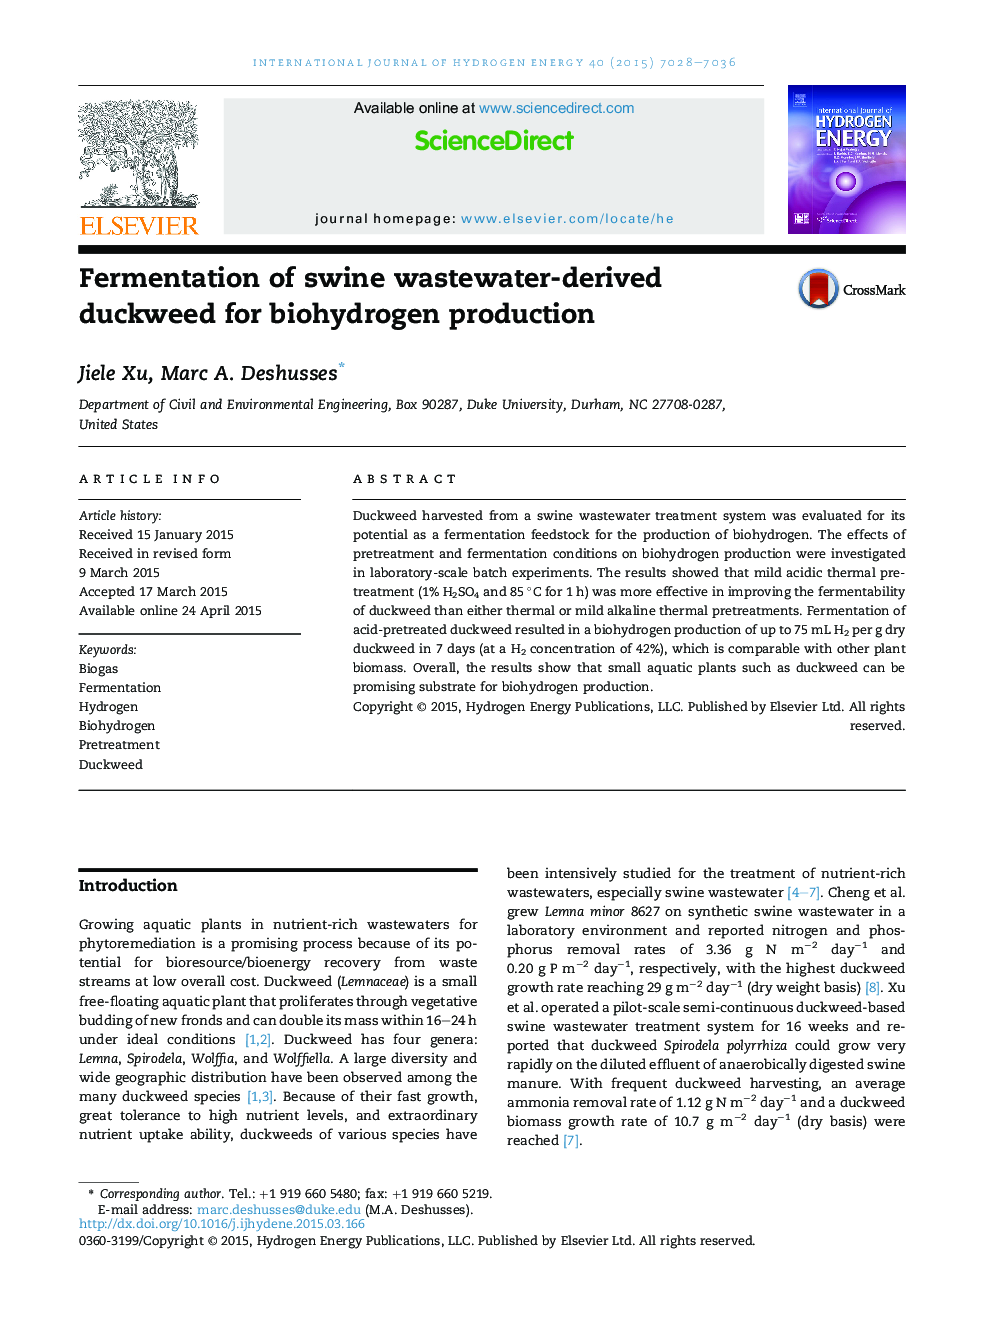 Fermentation of swine wastewater-derived duckweed for biohydrogen production